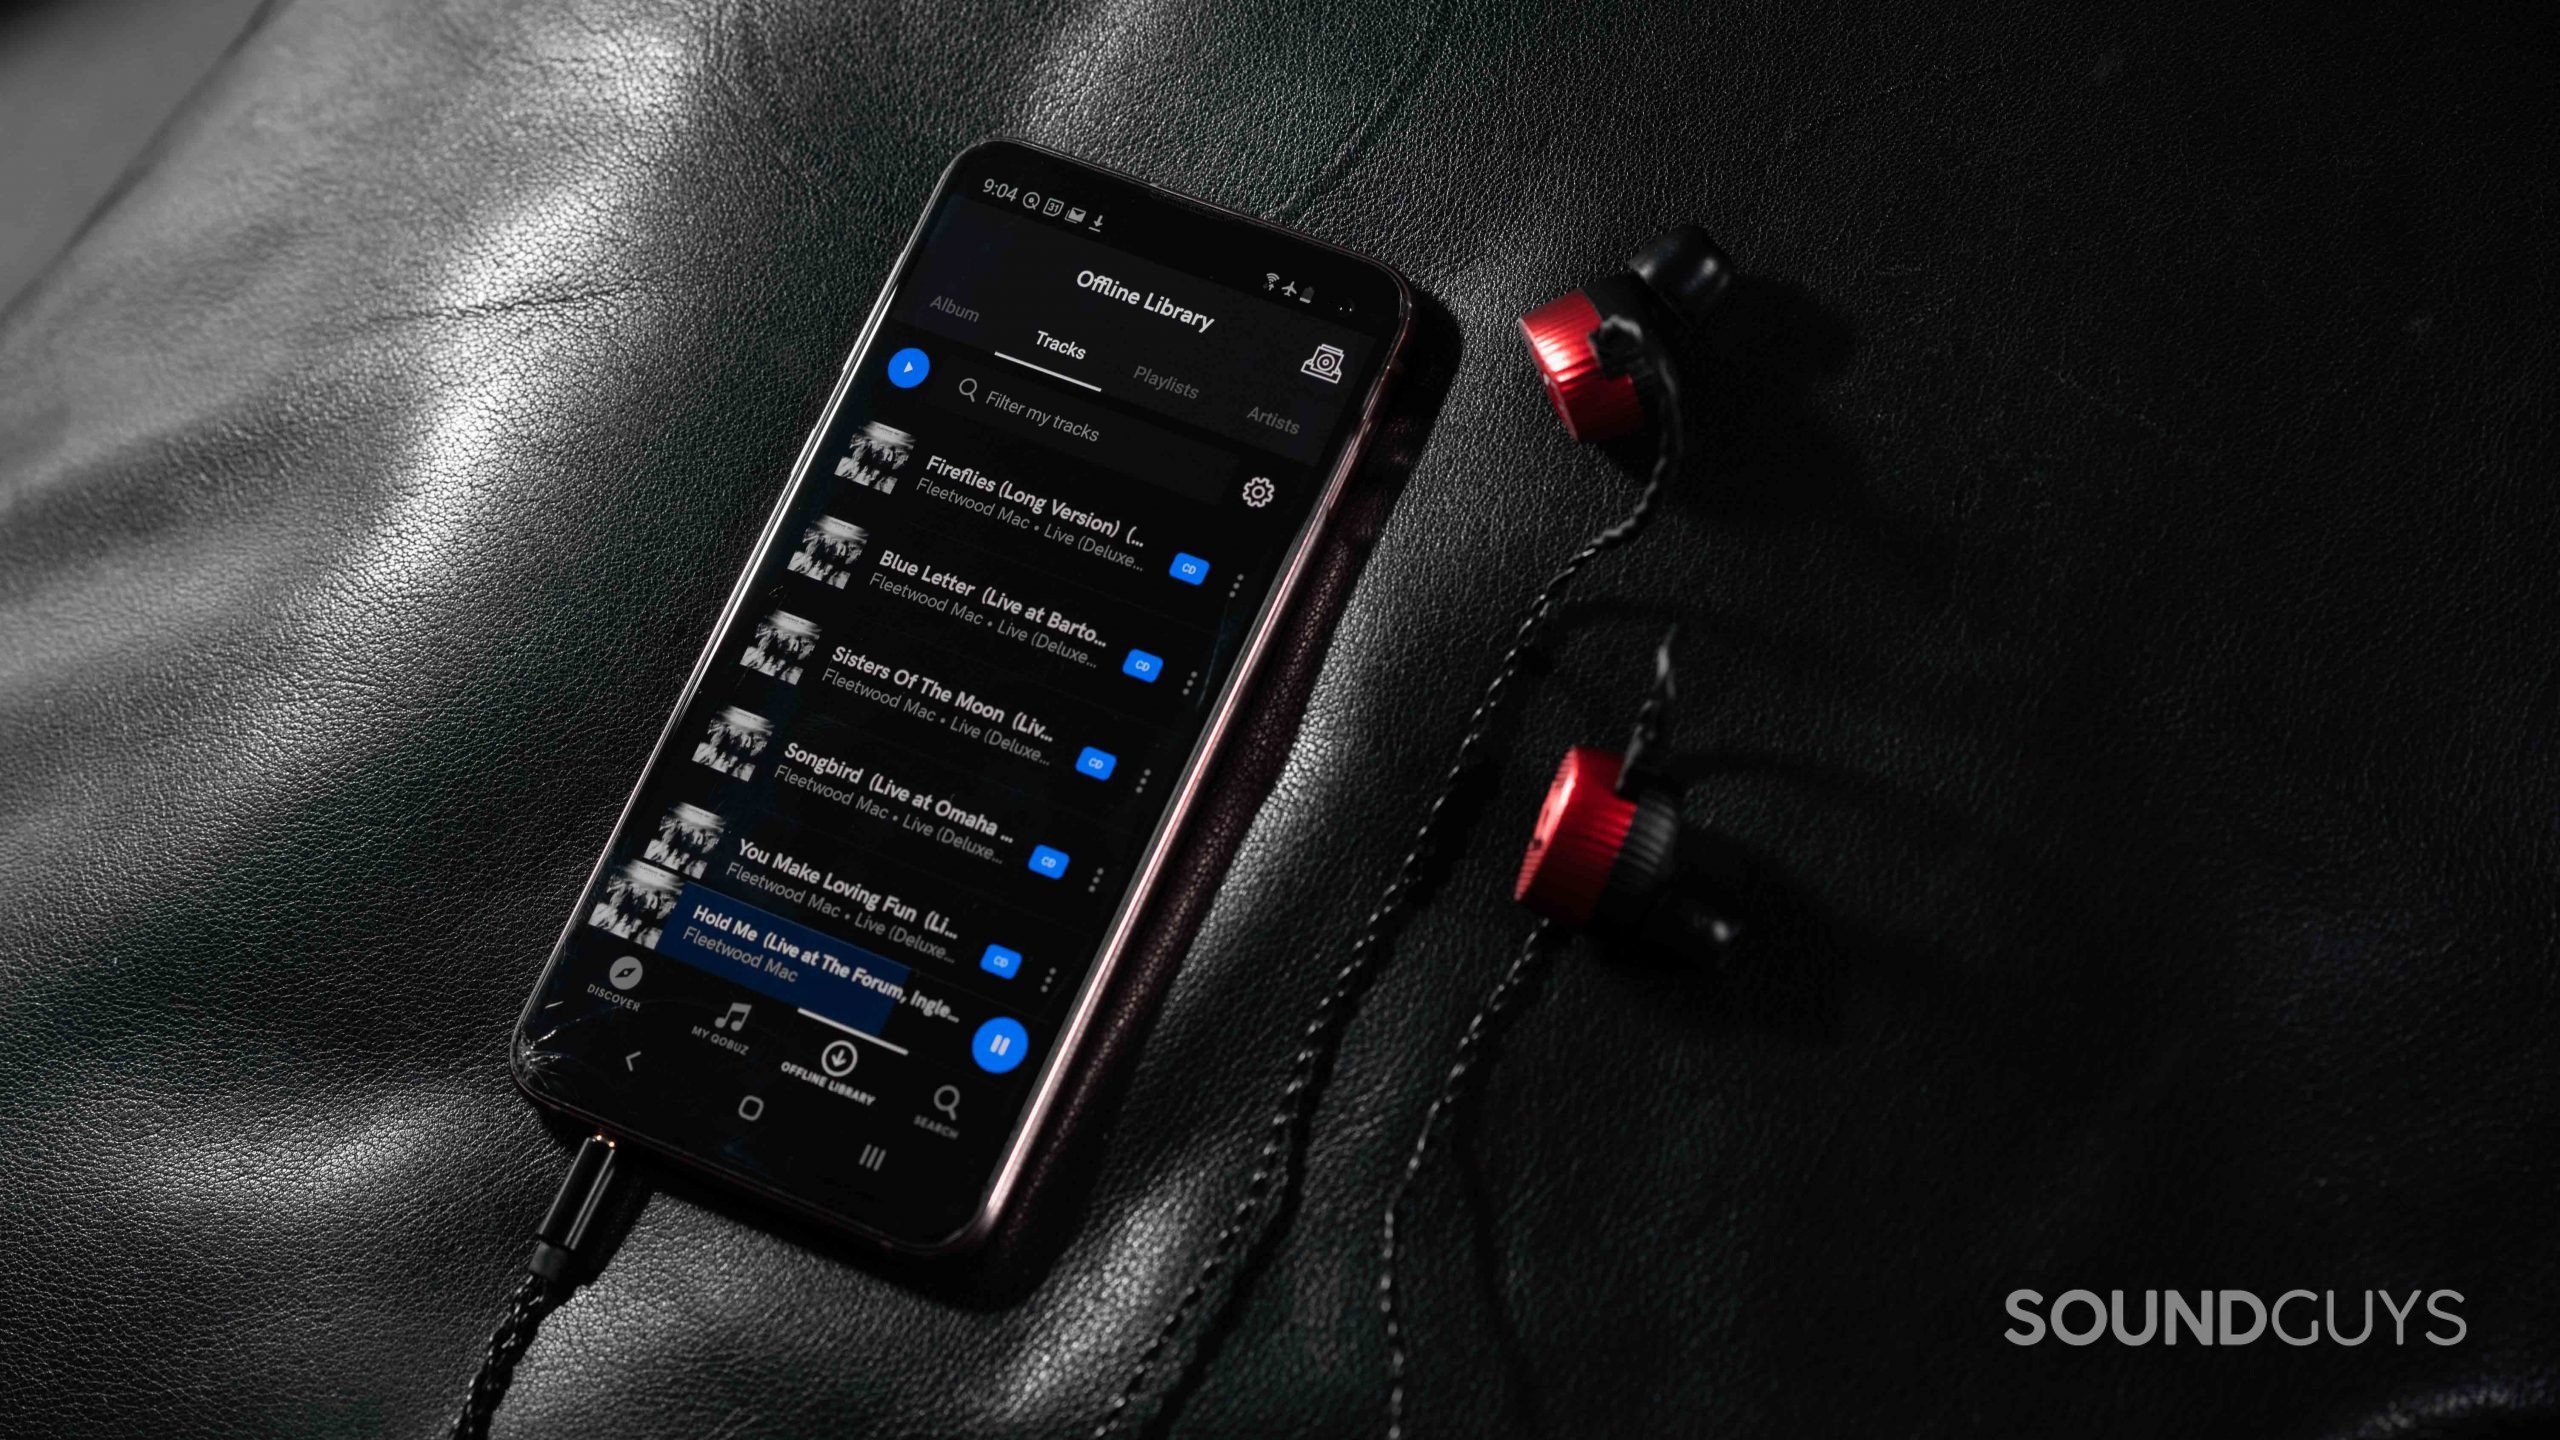 The Qobuz music streaming service app's Offline Library page open on a Samsung Galaxy S10e smartphone next to a pair of Massdrop x Noble Kaiser 10 IEMs.